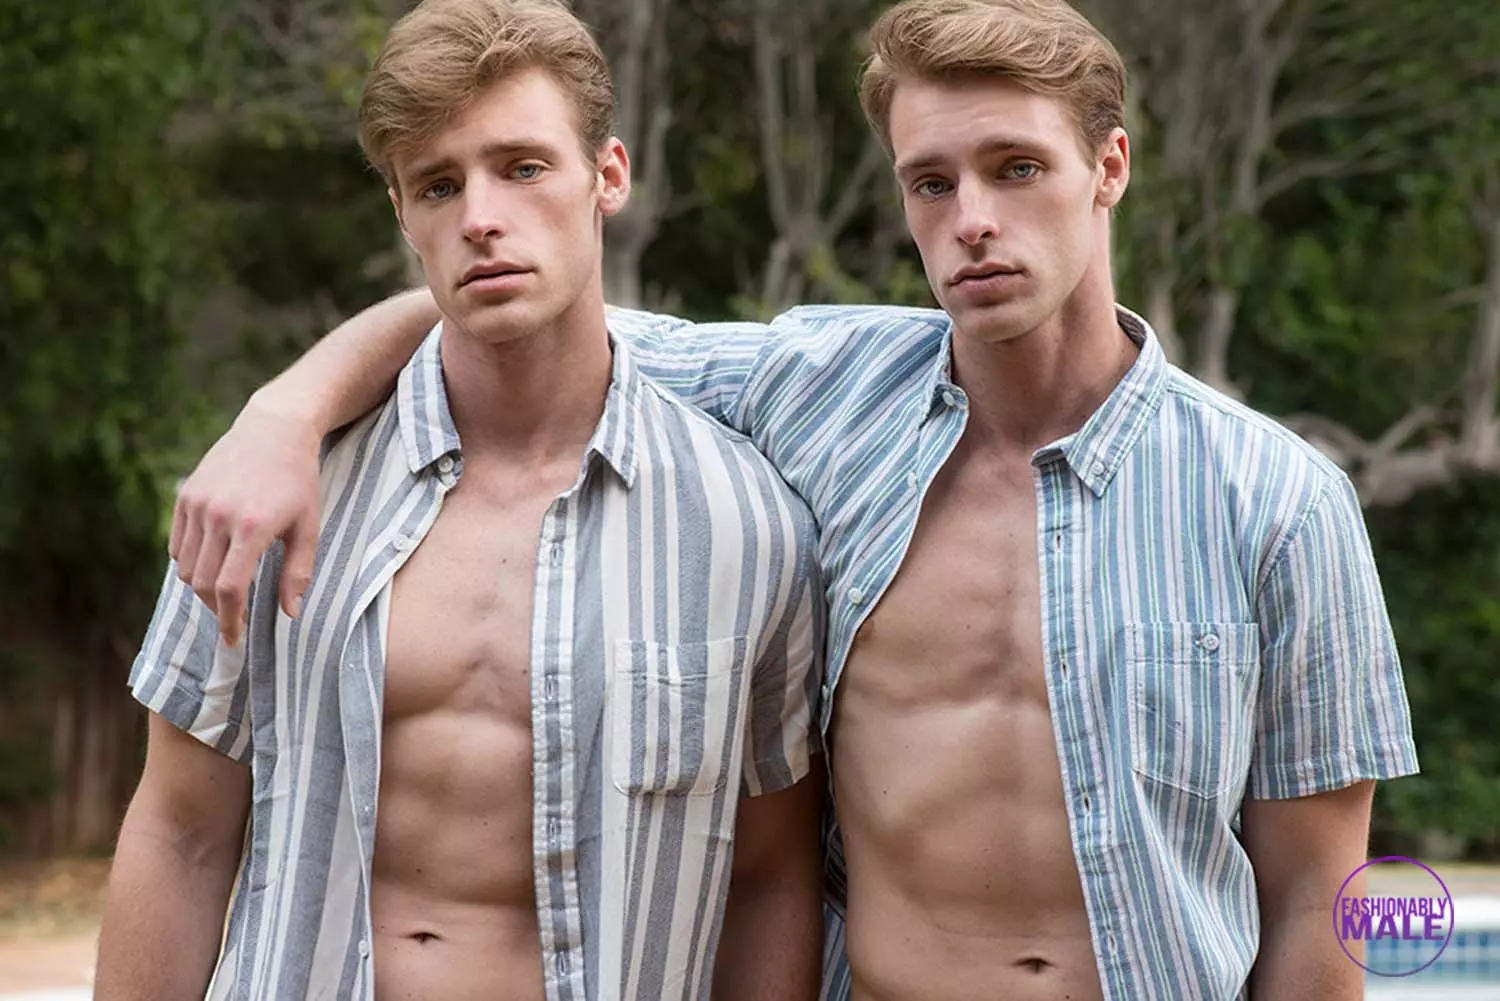 These Are The Hottest Twins on The Web: Alec & Austin Proeh Thanks to Walter Tabayoyong